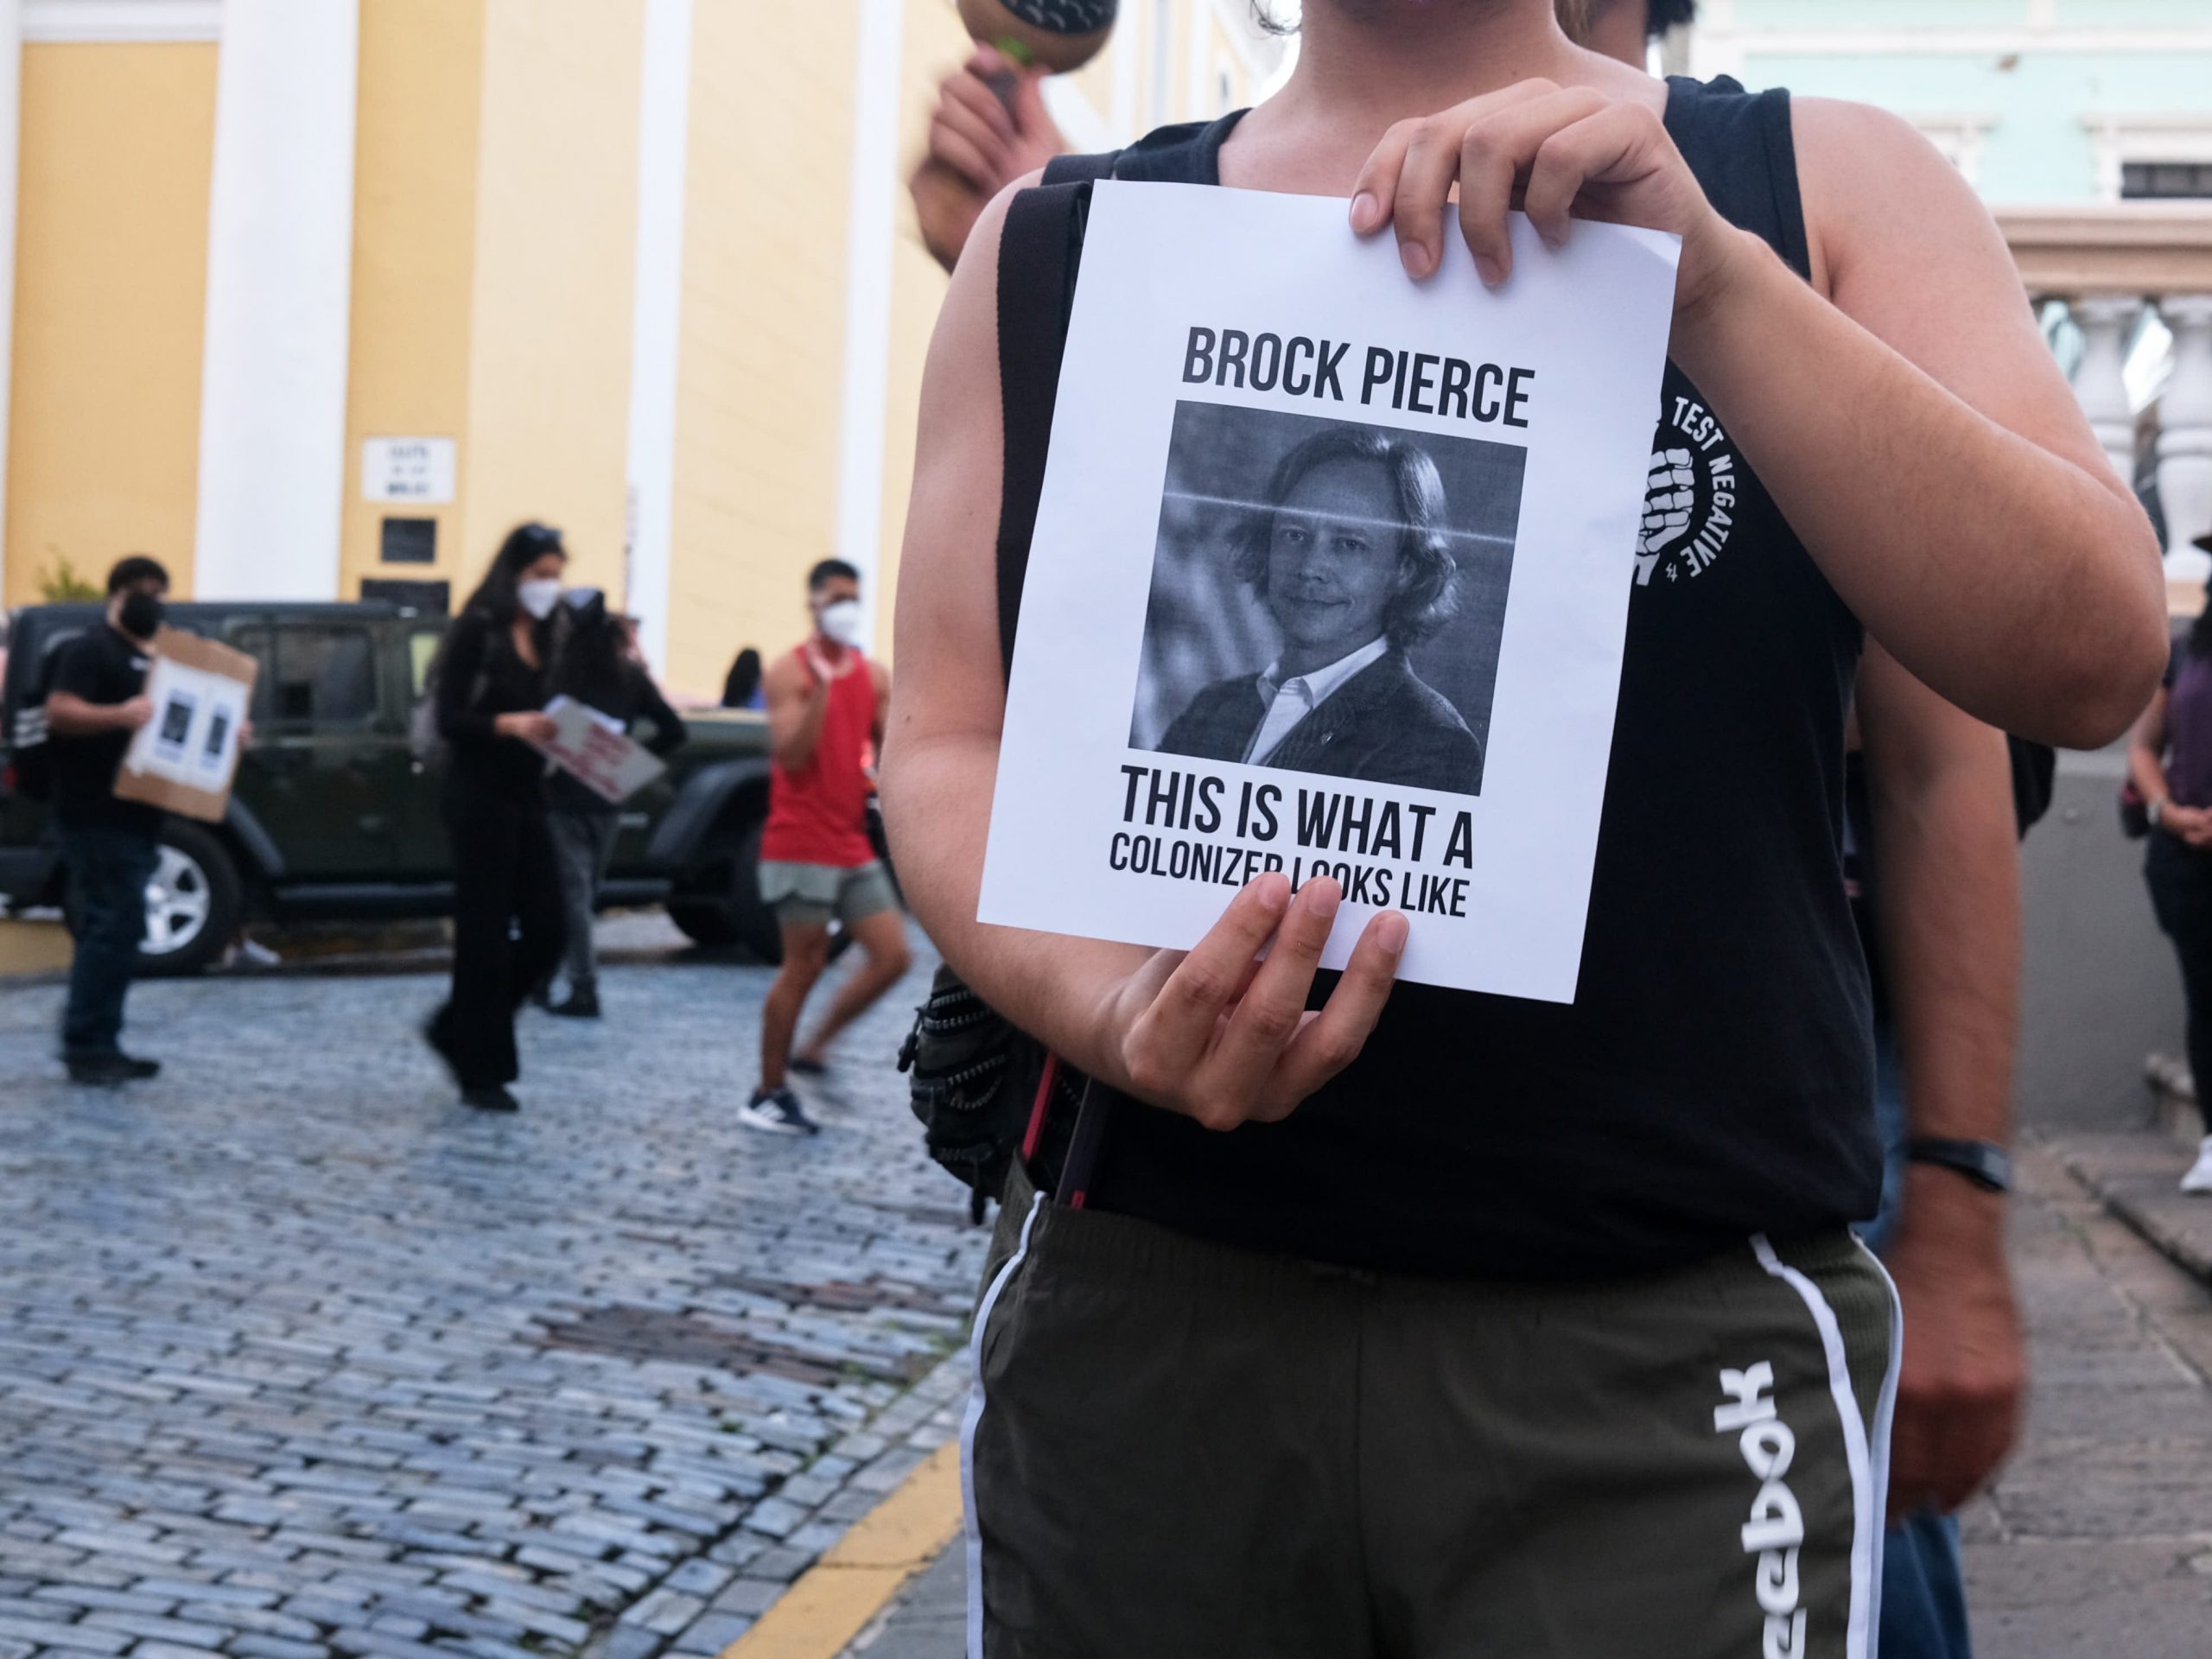 The protest was held in front of Brock Pierce's "crypto club house," a former children's museum.